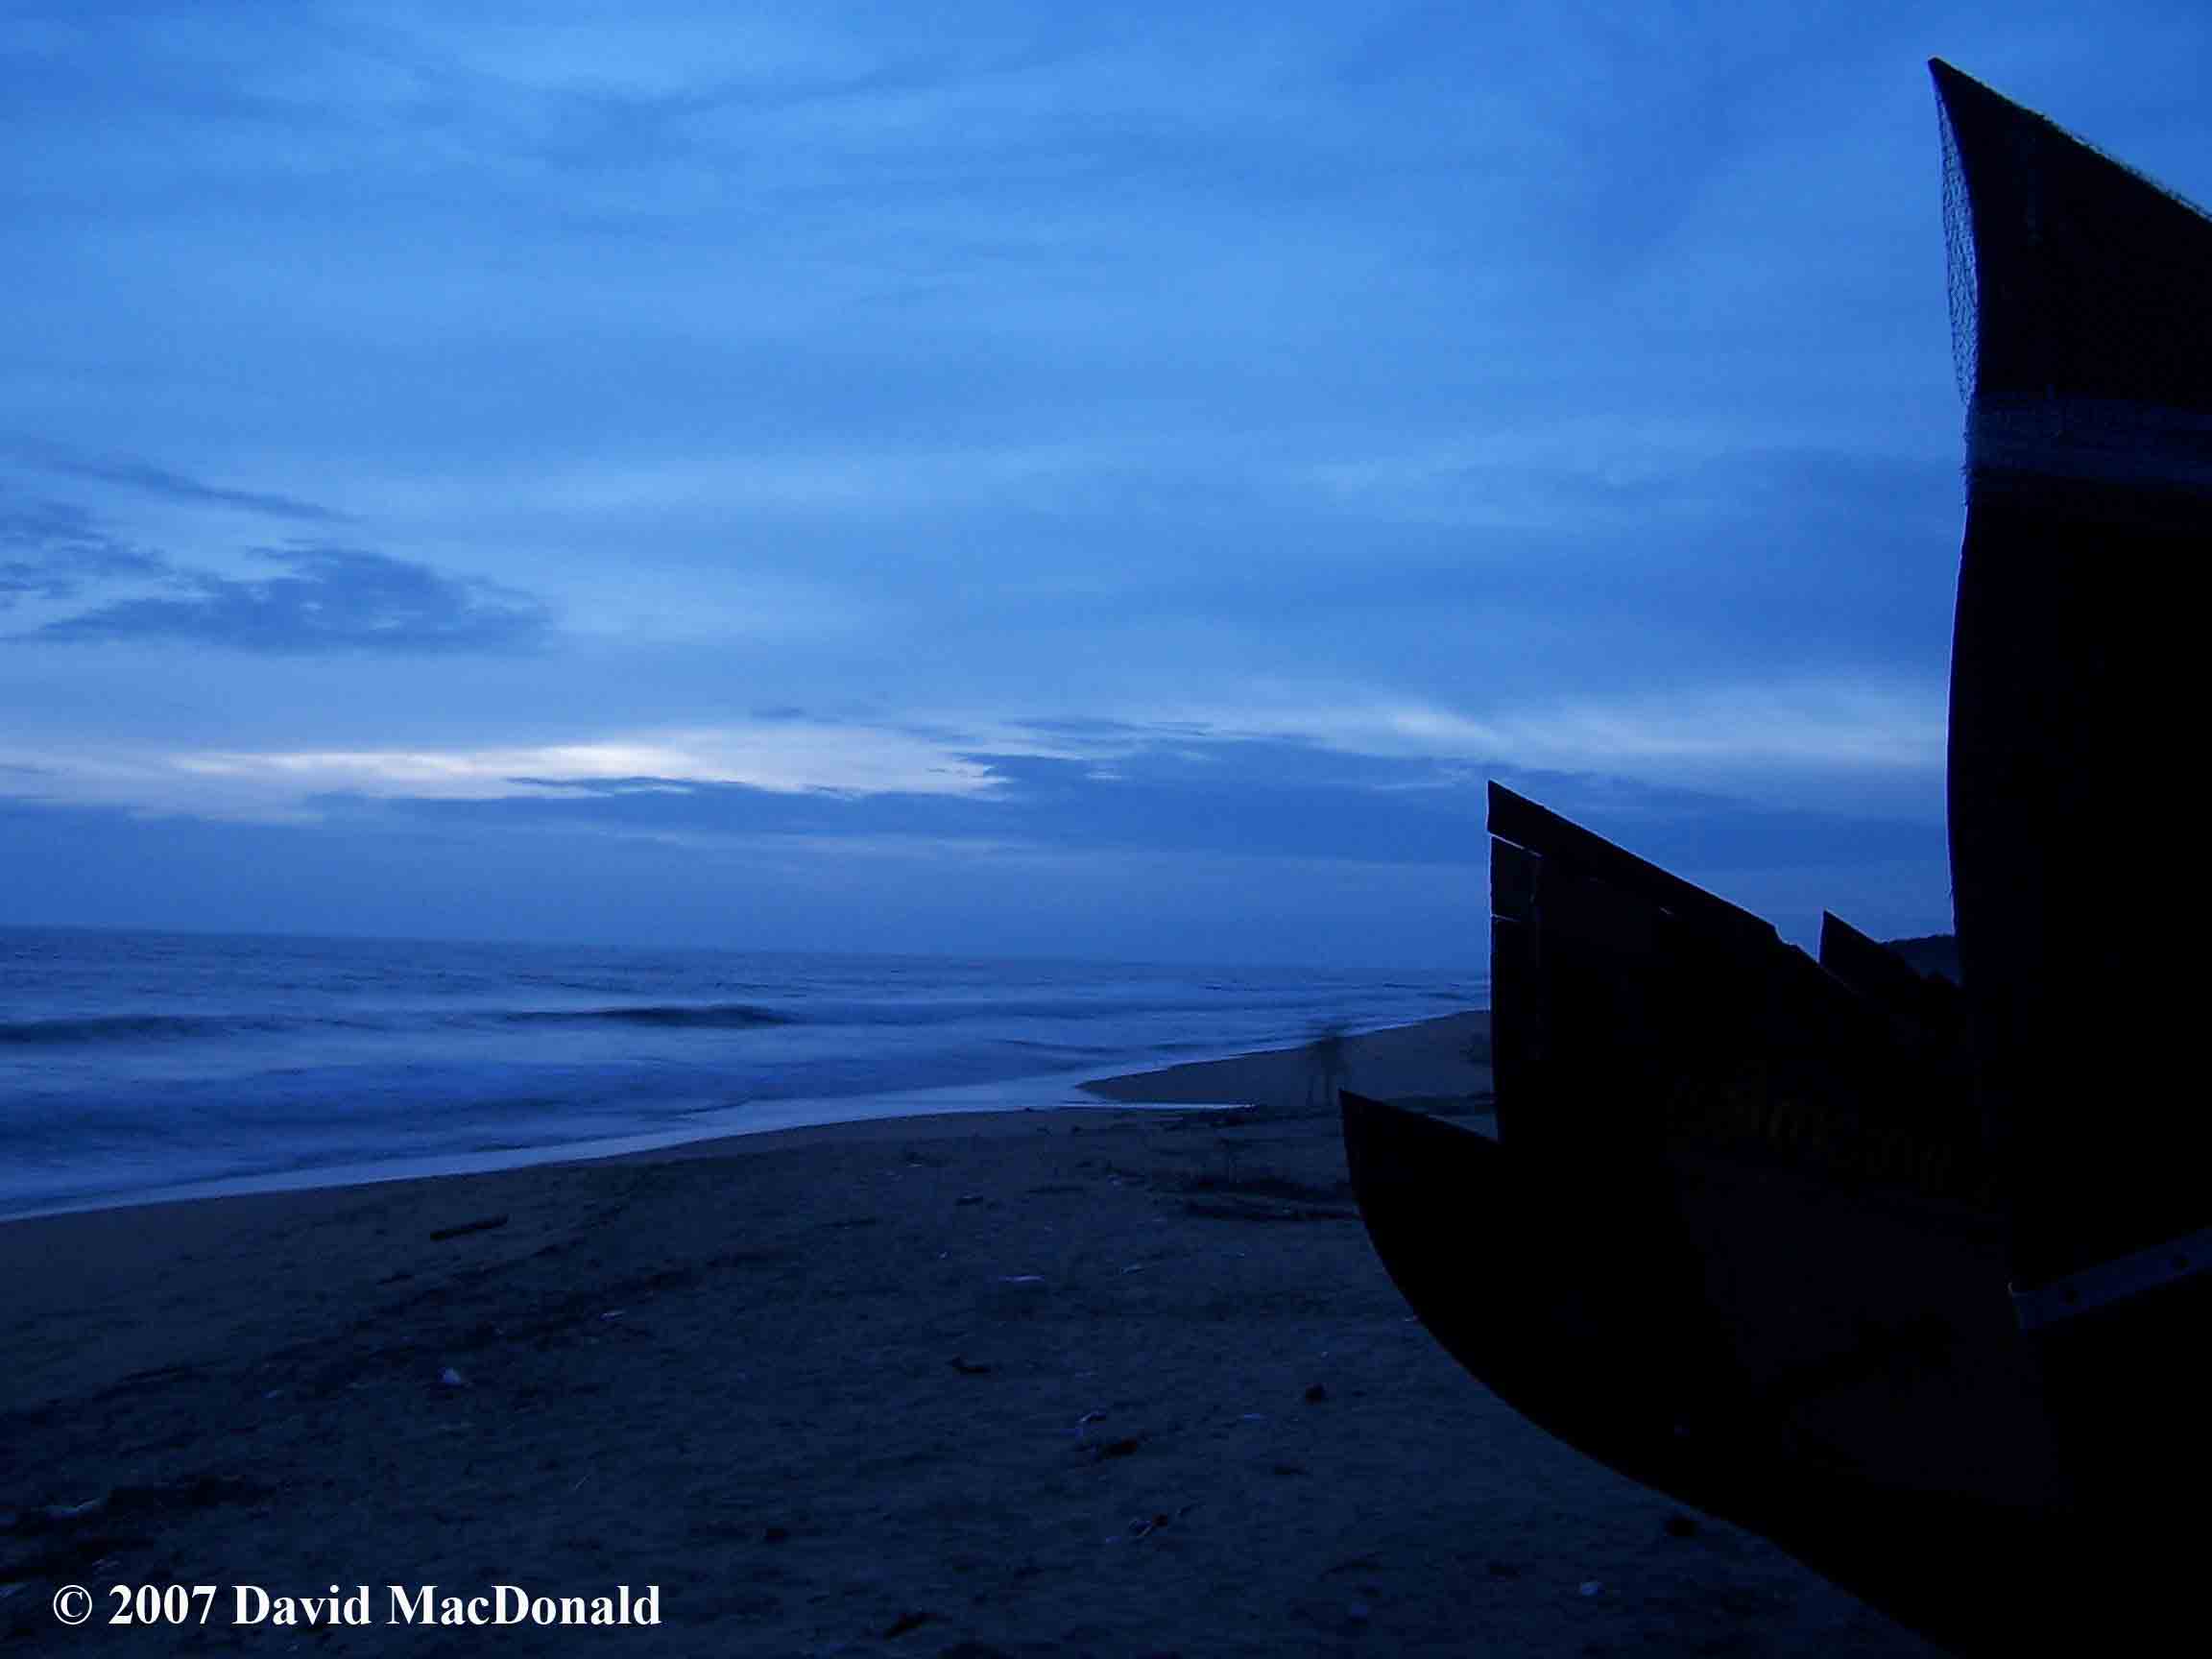 Indian fishing boats on the beach of the Arabian Sea at dusk 